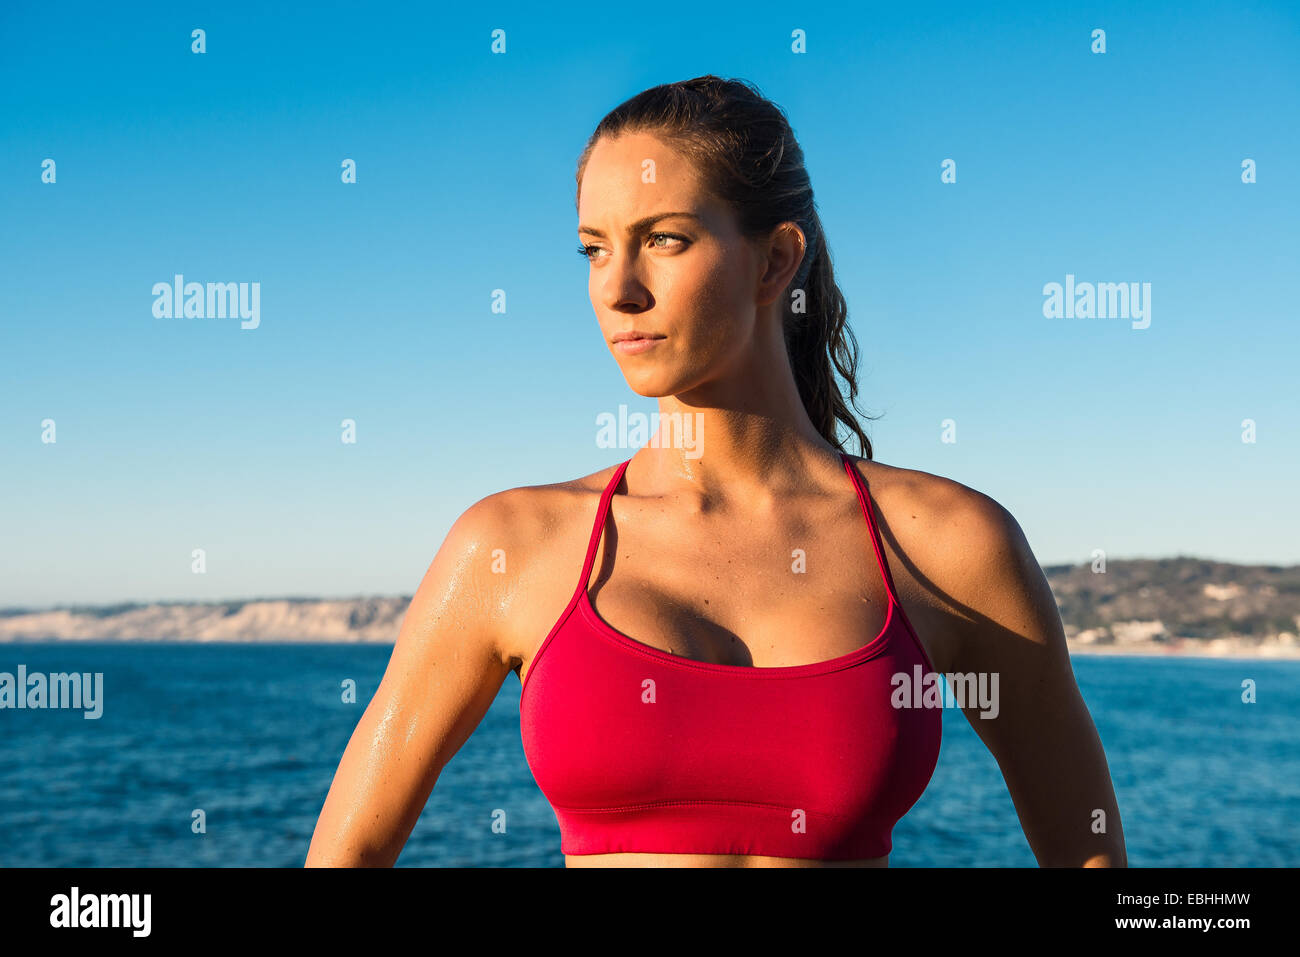 Portrait of young woman wearing sports top, on beach Banque D'Images